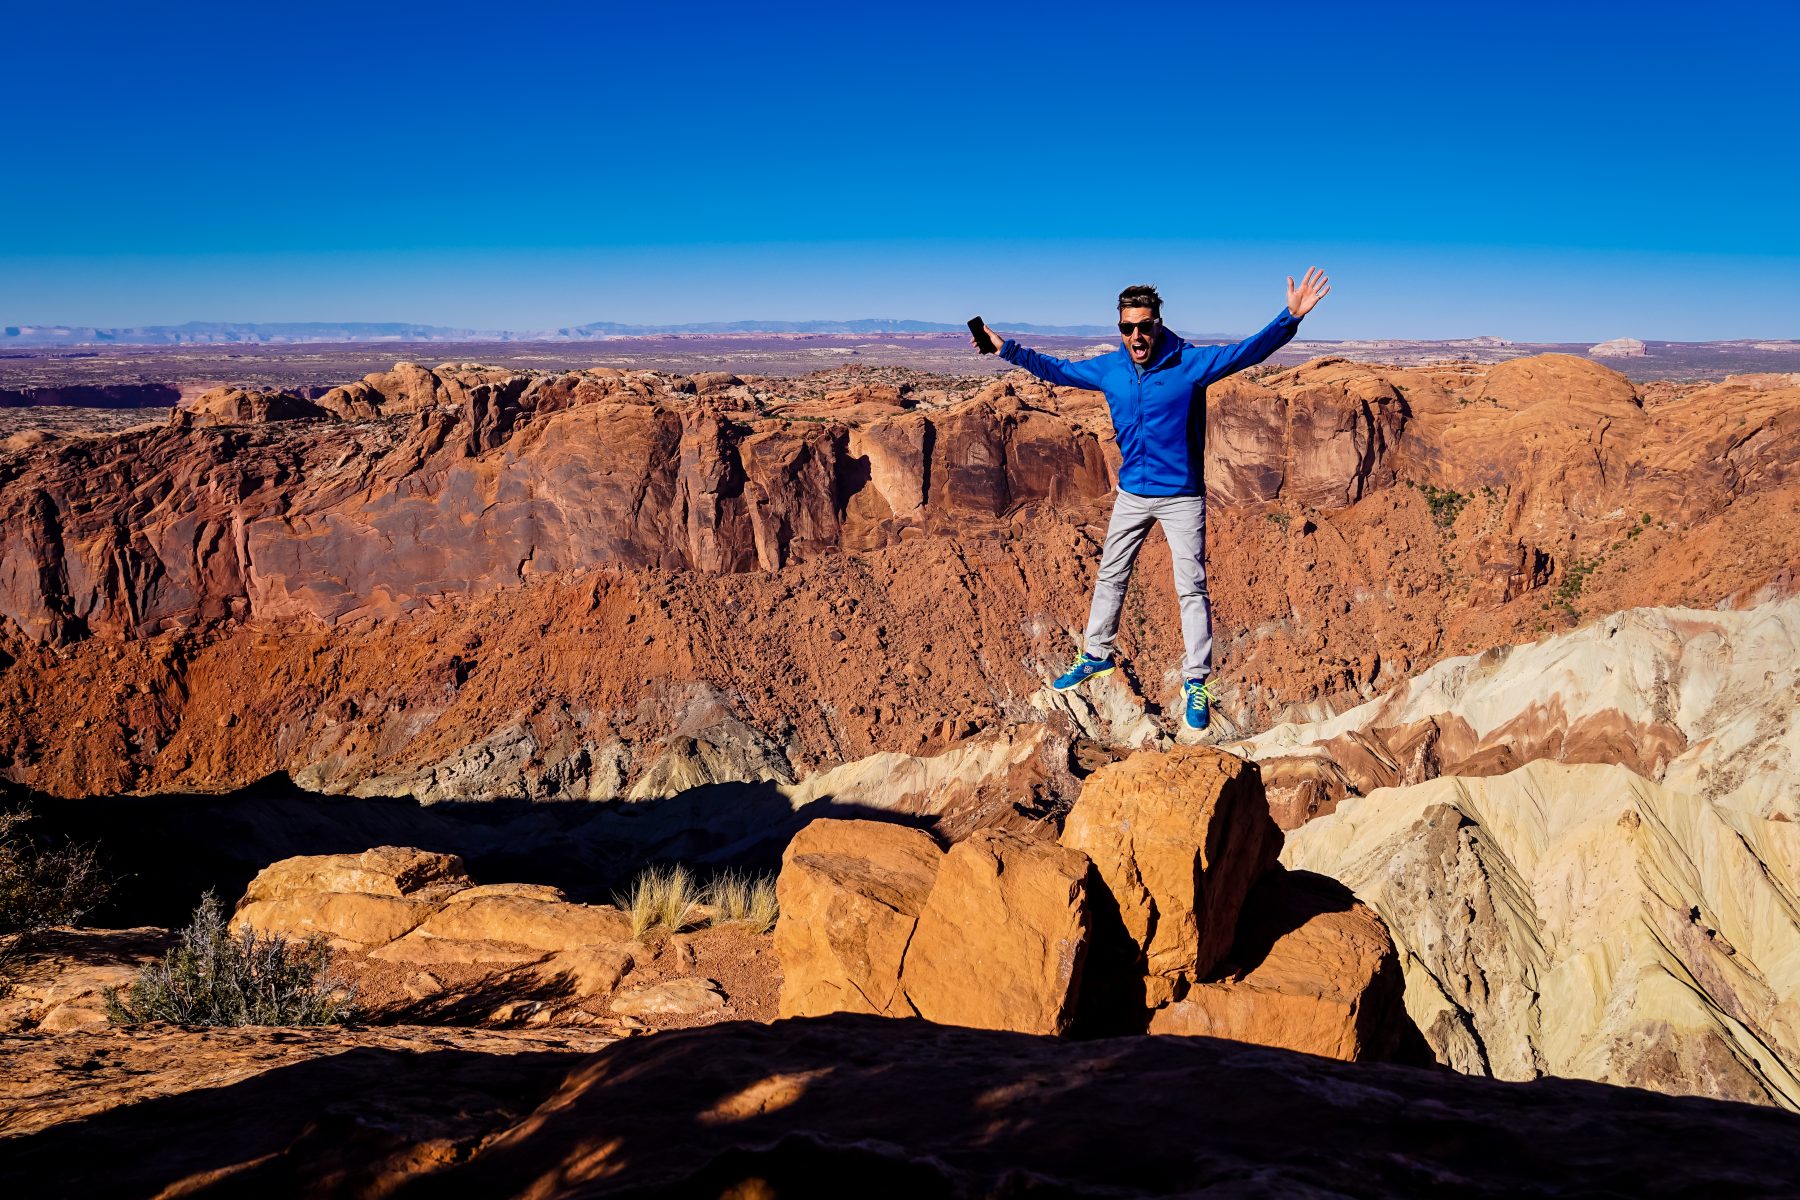 I was pretty excited to be on the rim of Upheaval Dome.